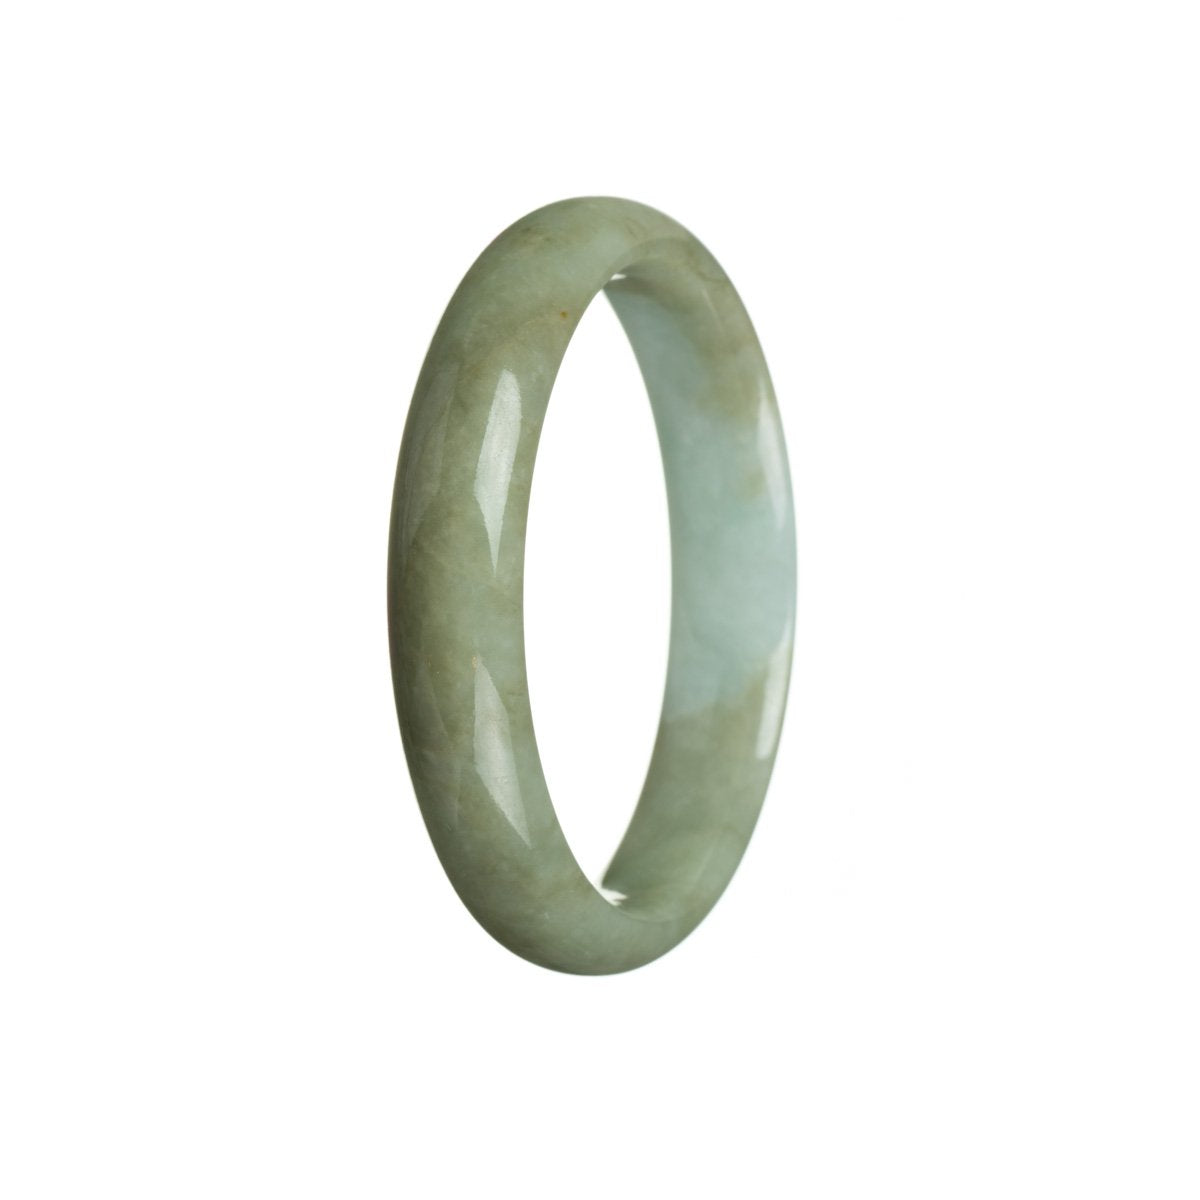 A half moon-shaped, 56mm green Burmese jade bracelet with certification, showcasing its high quality and authenticity.